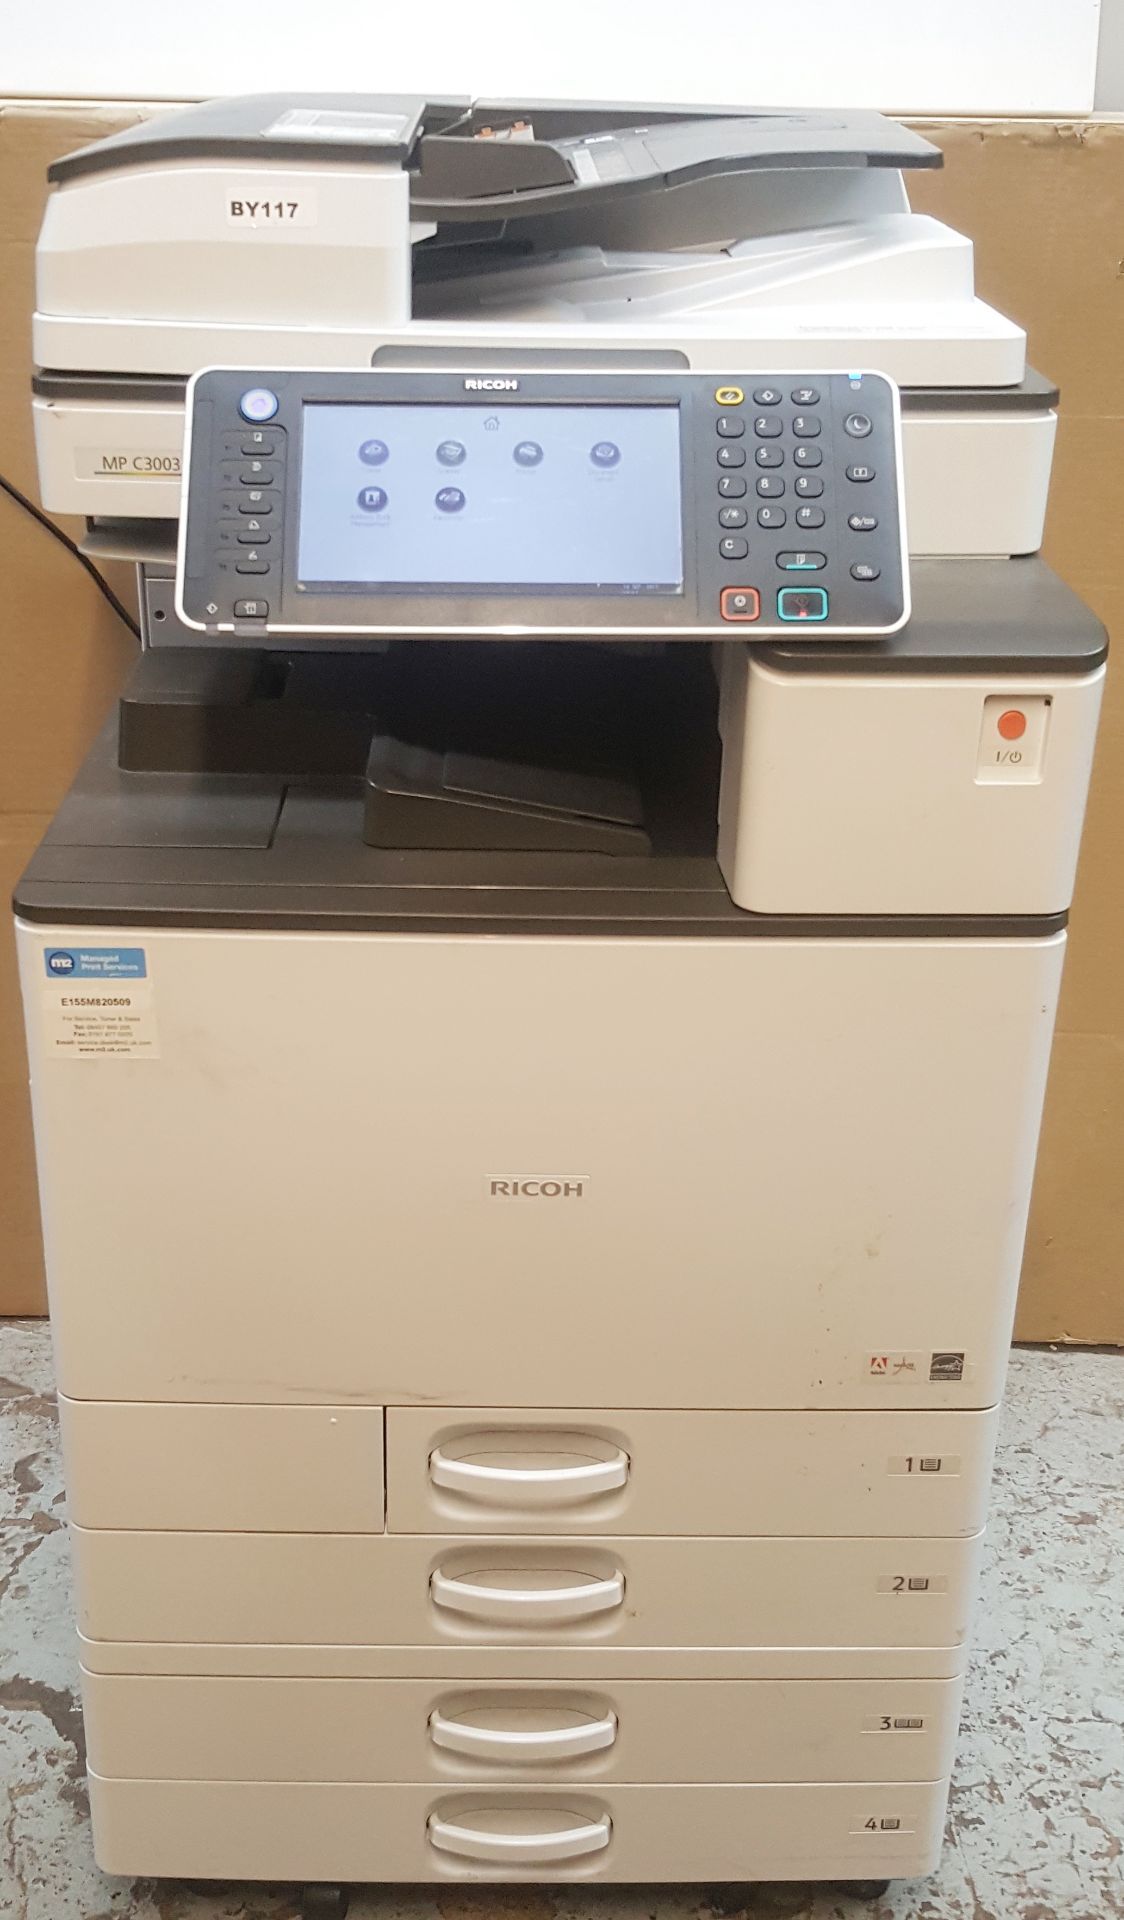 1 x RICOH MP C3003 Color Laser Multifunction Office Printer - Ref BY117